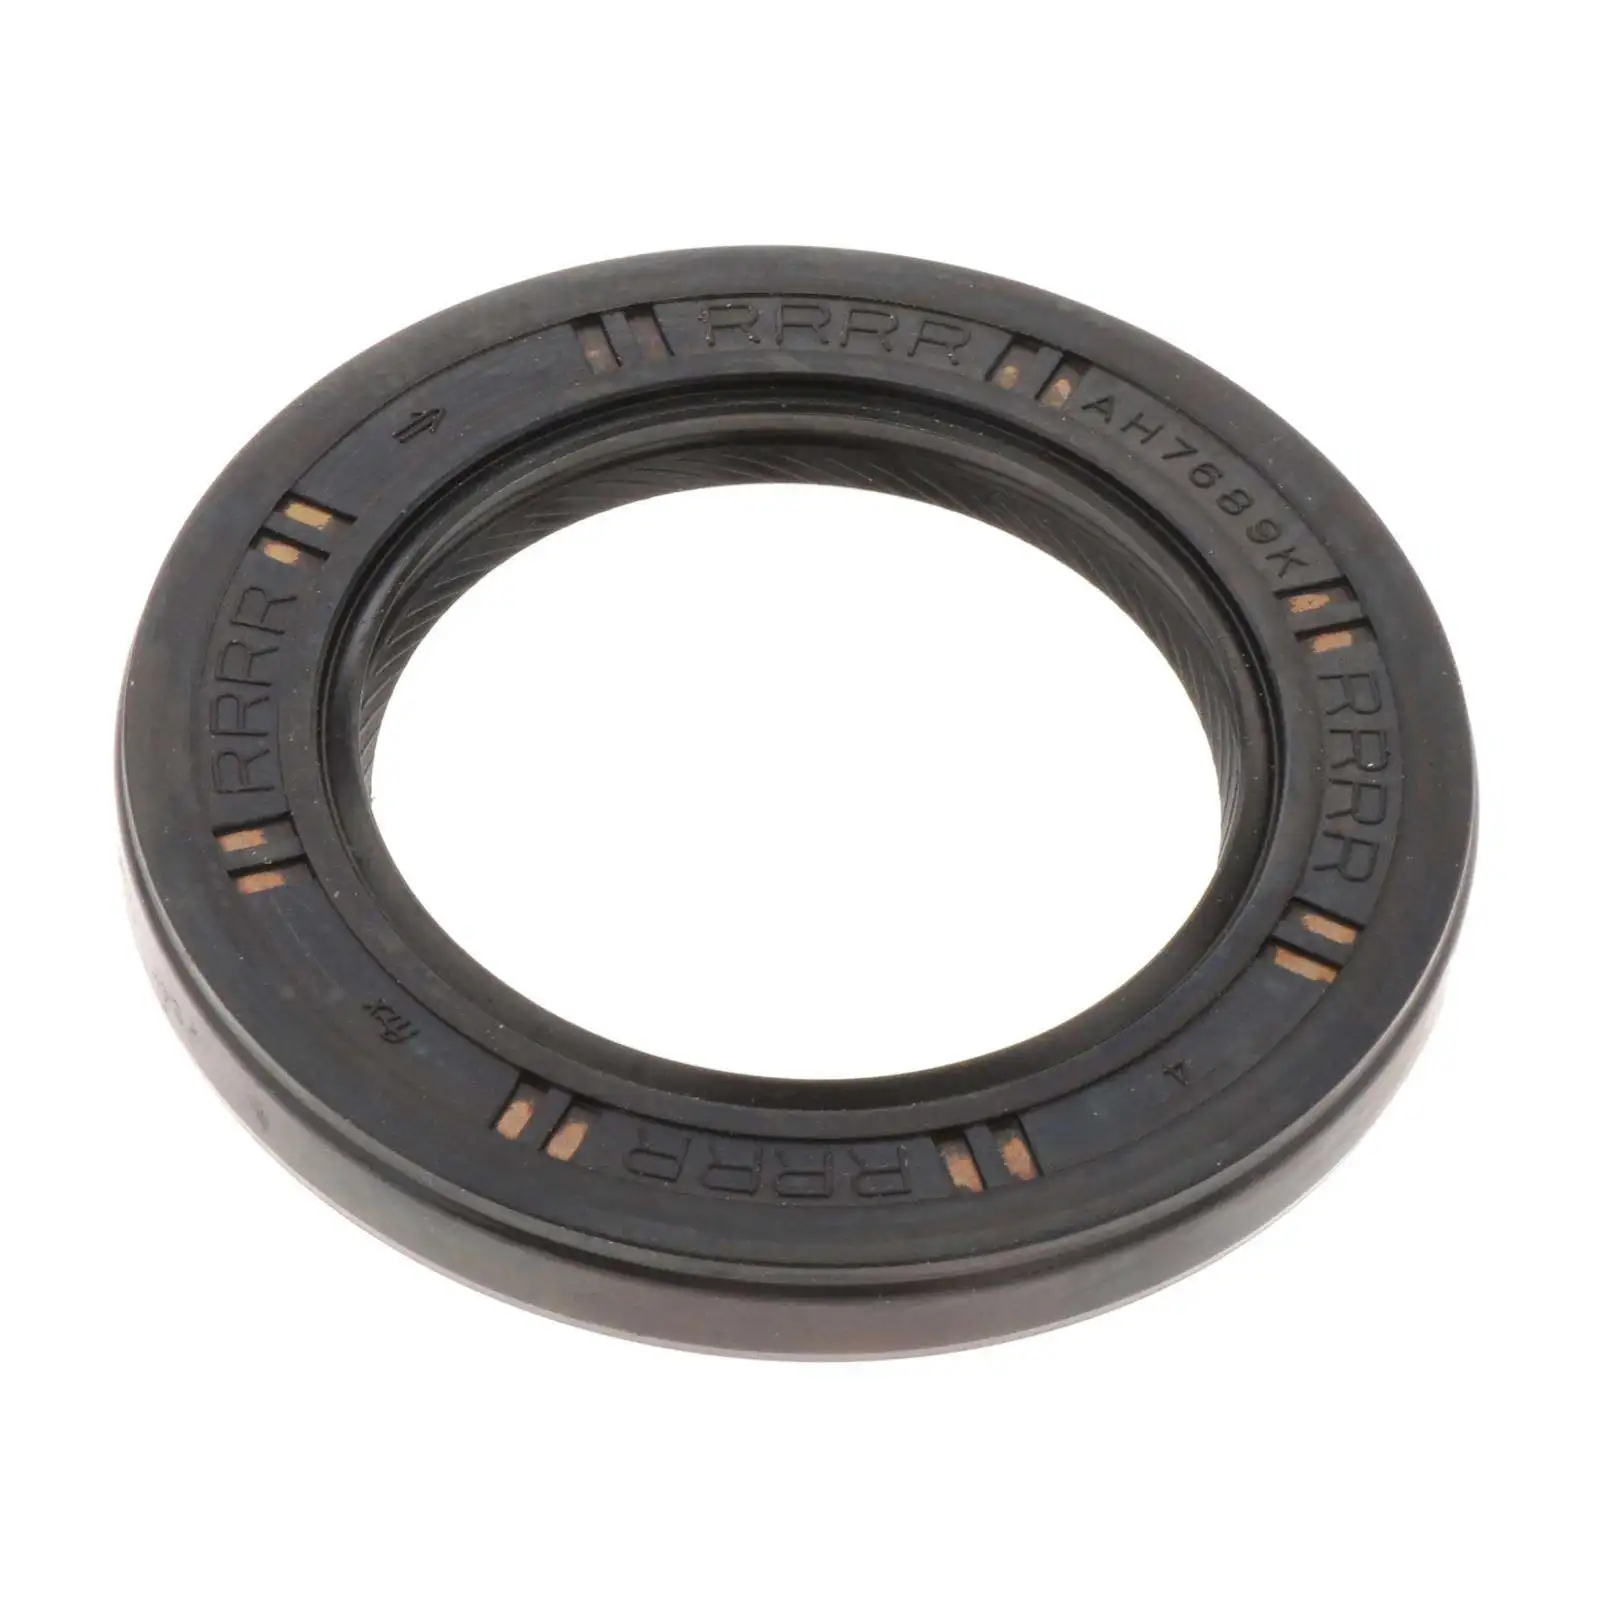 BCLA MFKA RE4 Front Oil Seal Rubber CVT Transmission Shaft Oil Seal for Honda for Accord Replaces 5SP Spare Parts